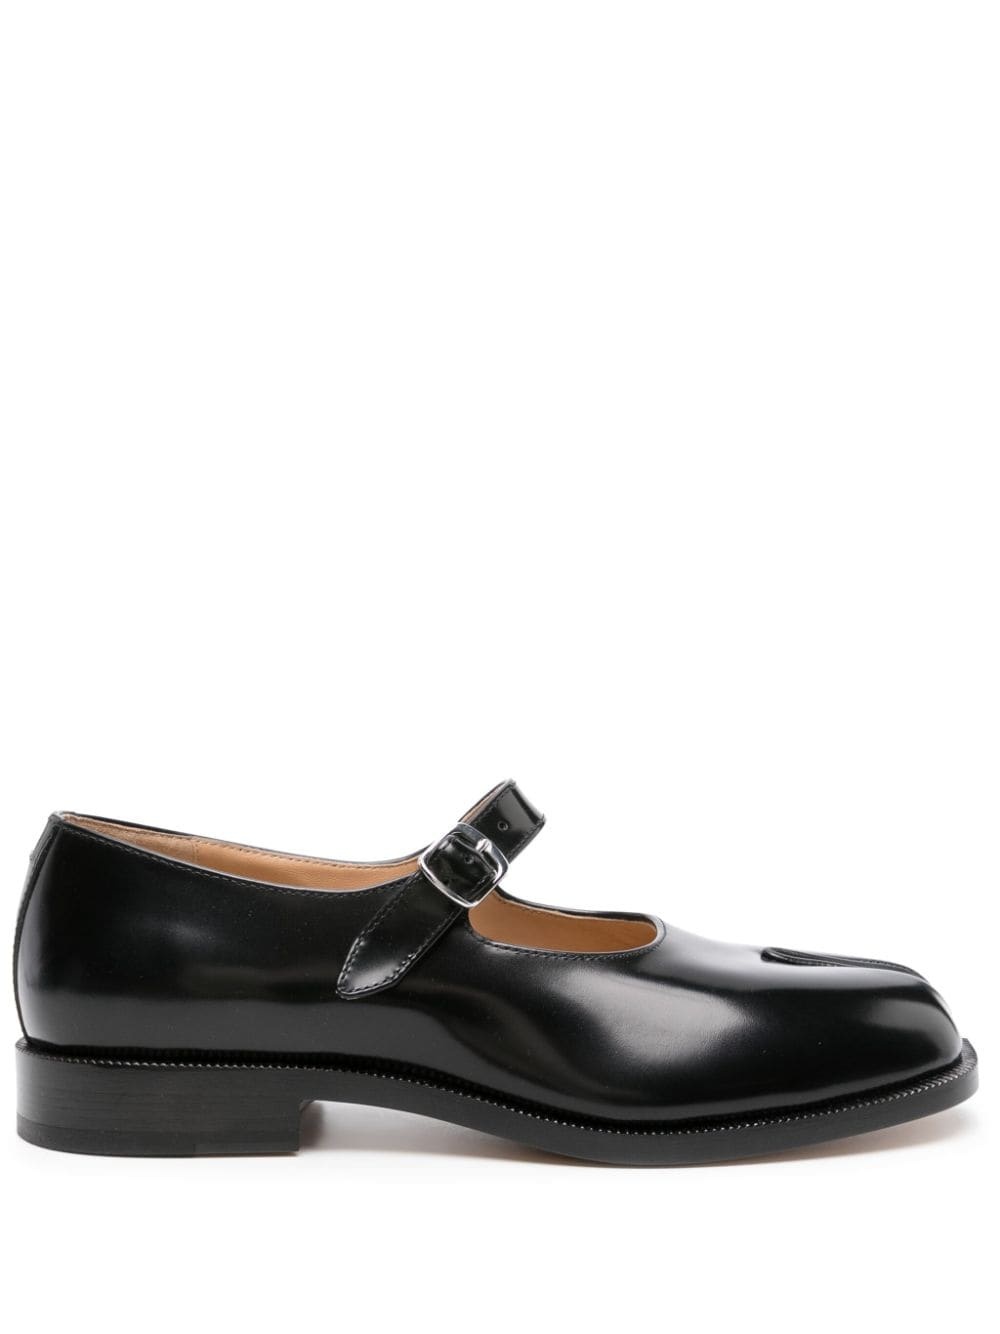 Tabi leather Mary-Janes - 1